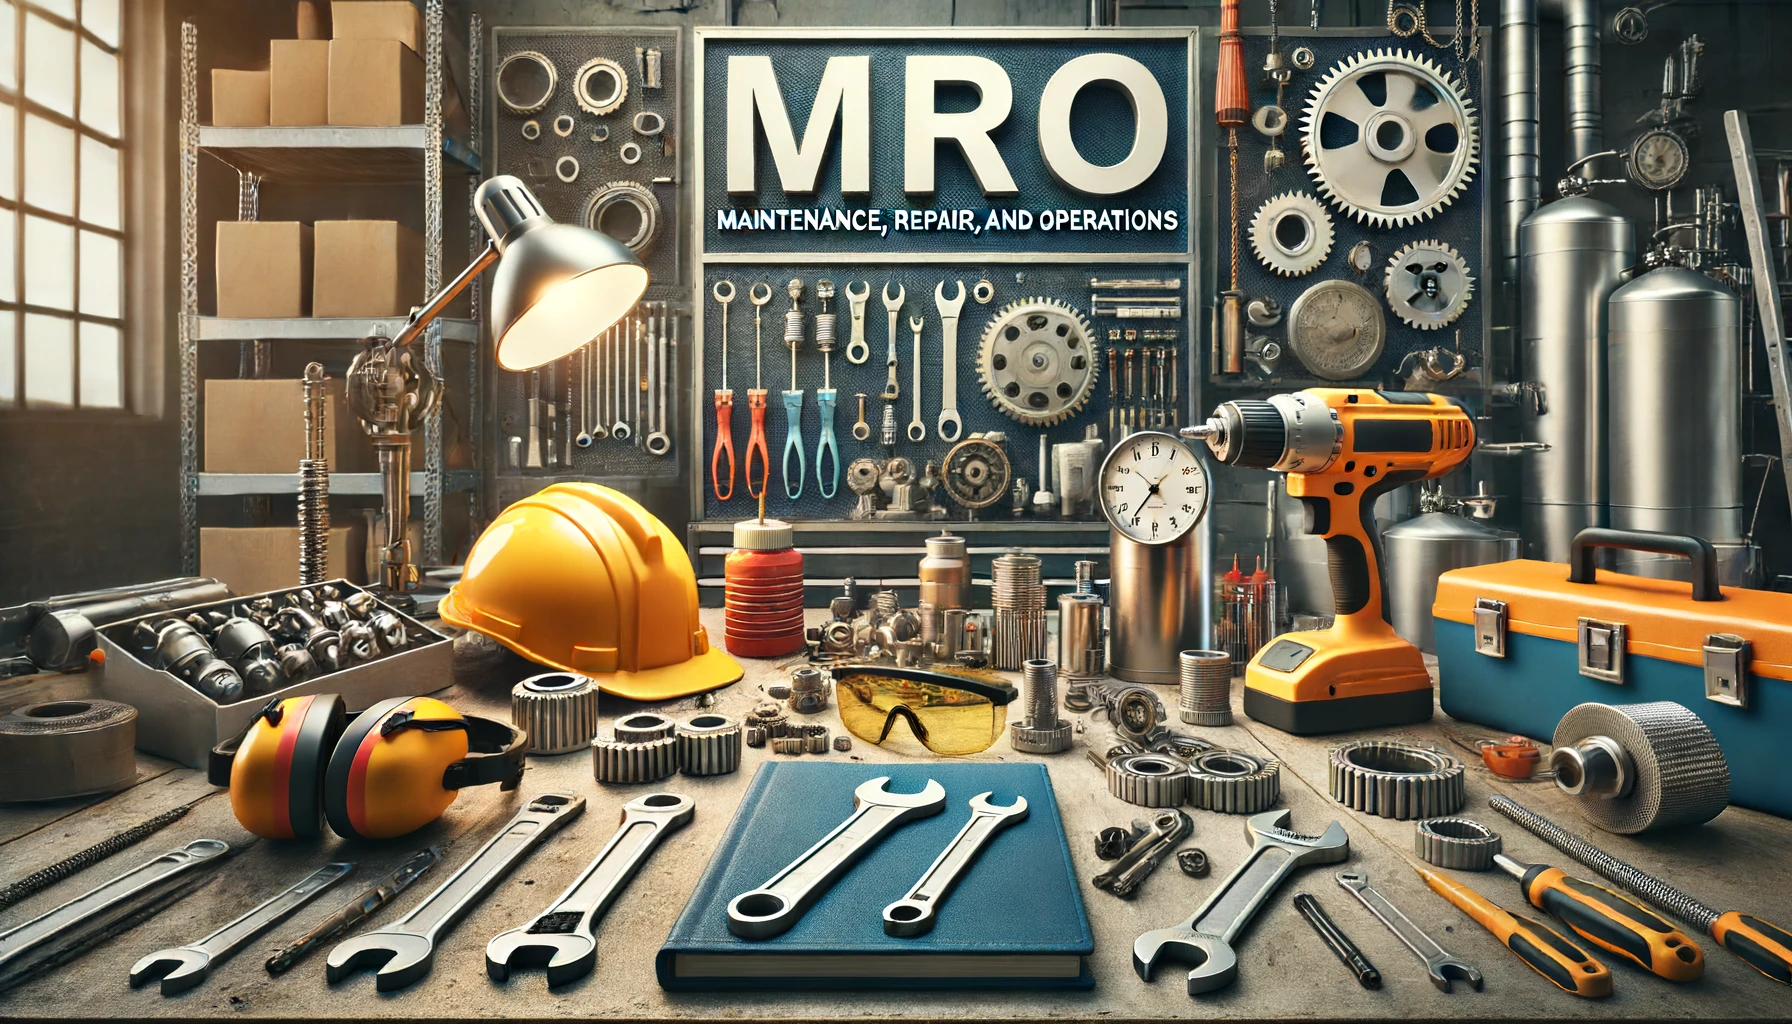 Tier 1 HUBZone woman-owned Certified MRO supplies